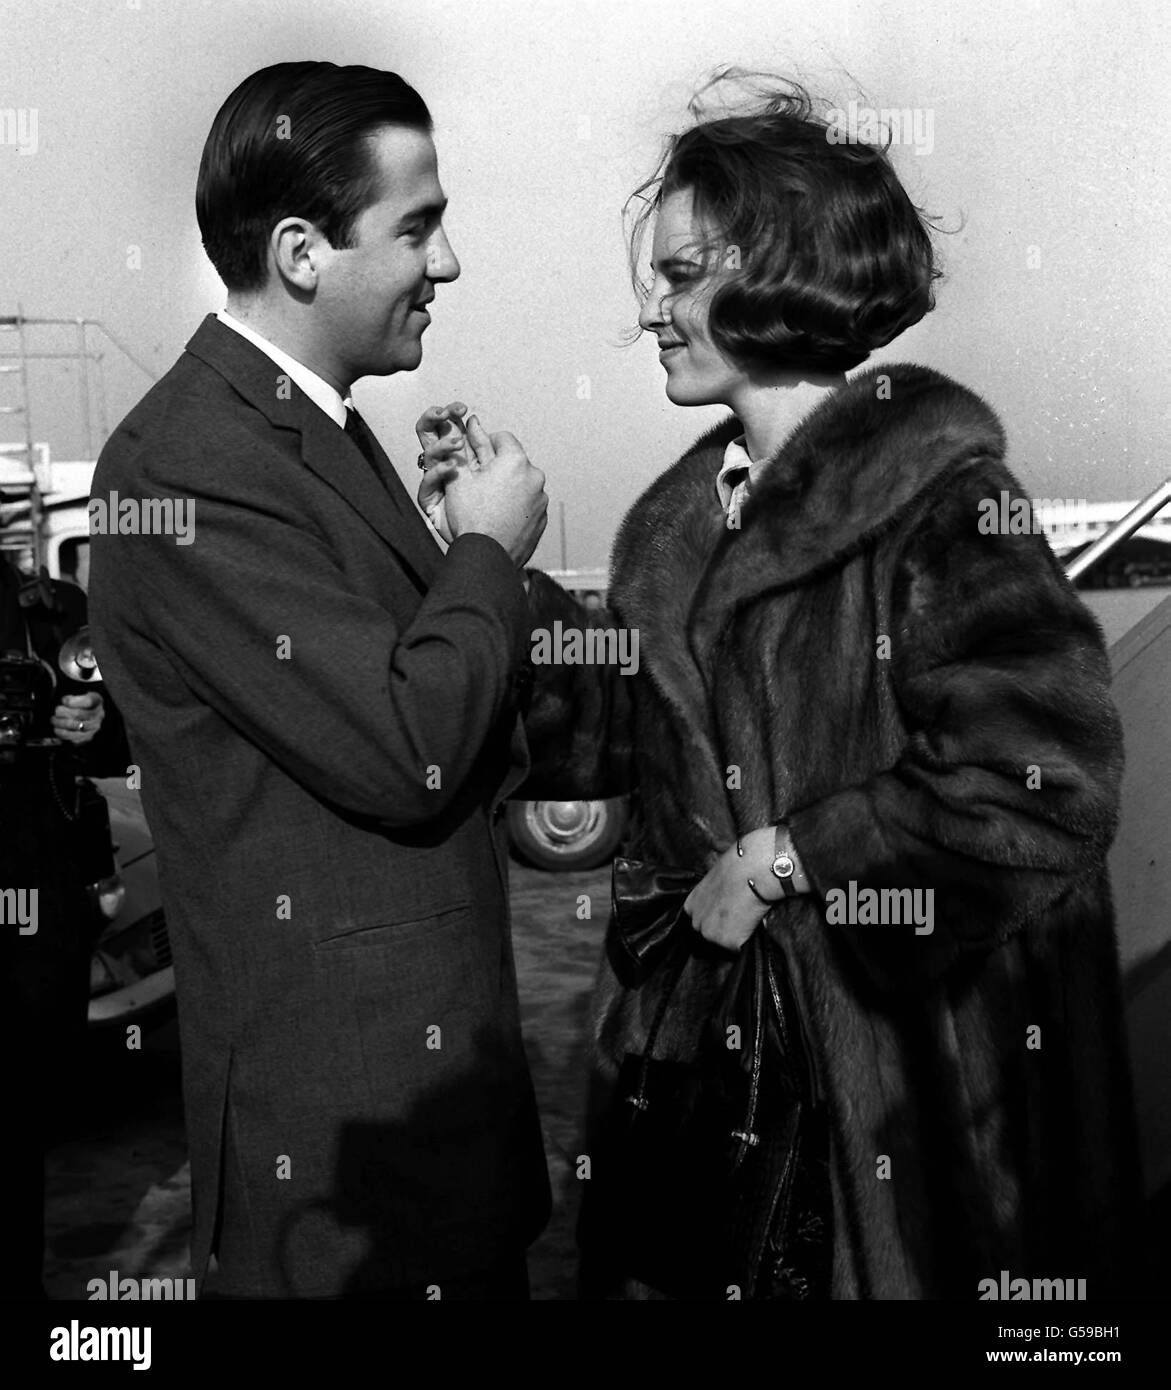 1965: A clasp of the hands as King Constantine of Greece greets his young wife, Queen Anne-Marie, on her arrival at London Airport from Copenhagen. The Queen will stay privately in Britain for a few days before returning to Greece with her husband. Stock Photo